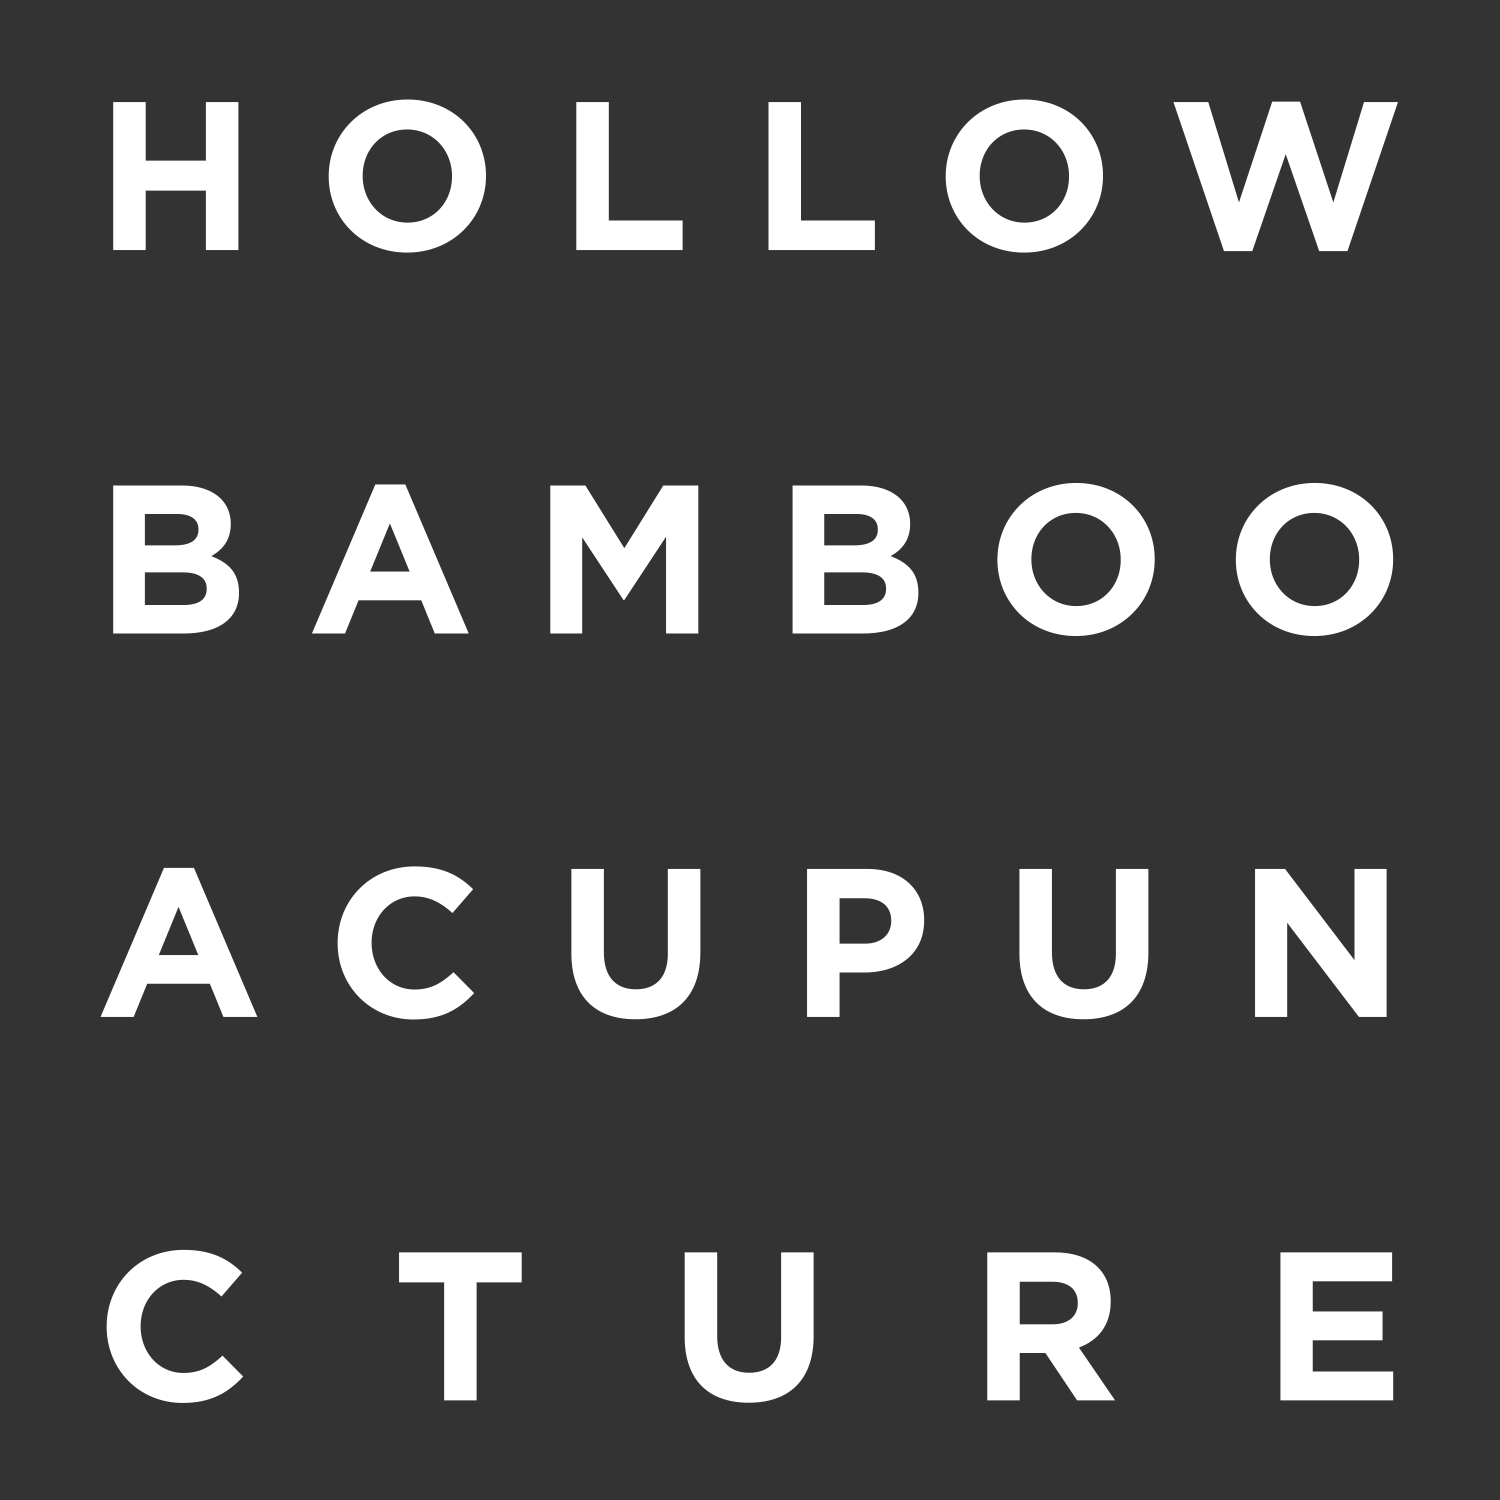 Hollow Bamboo Acupuncture